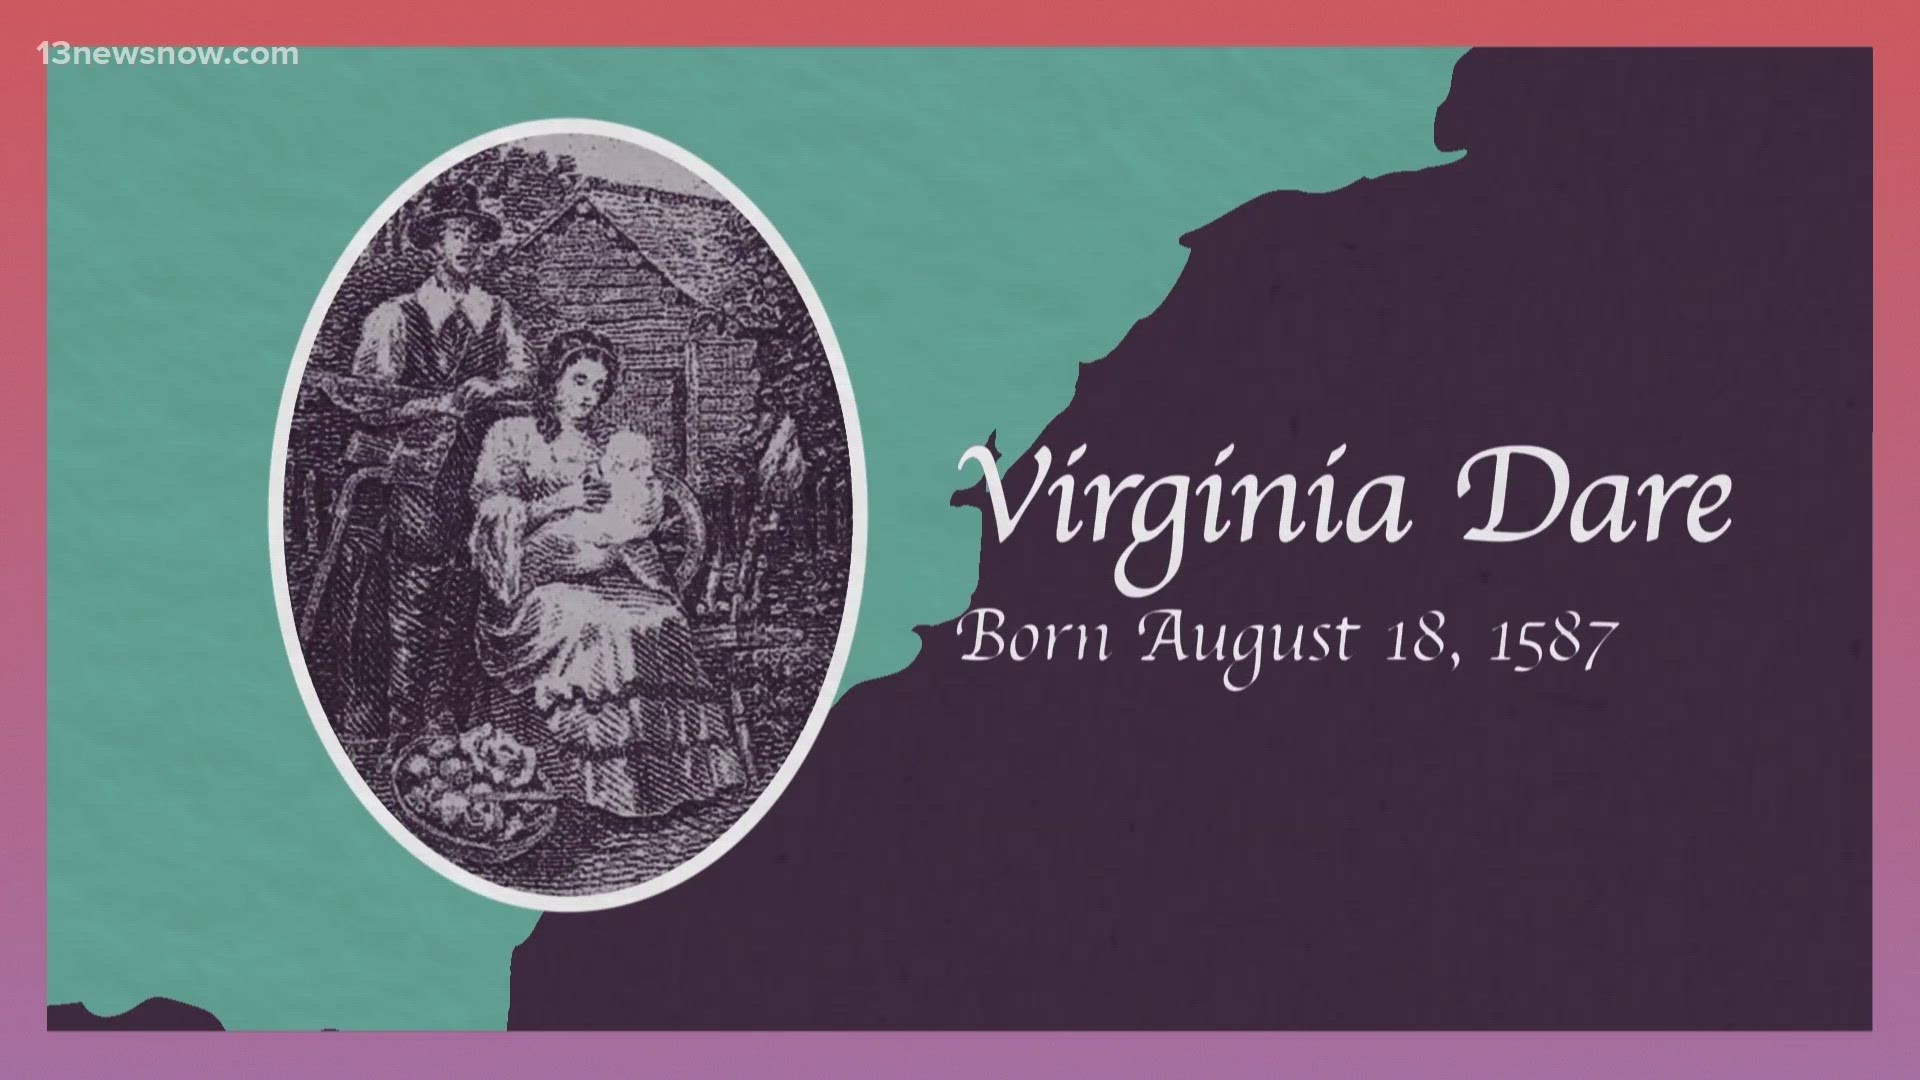 Virginia Dare, the daughter of Eleanor, was the first child born in the new world in 1587. Then, the colony went missing.